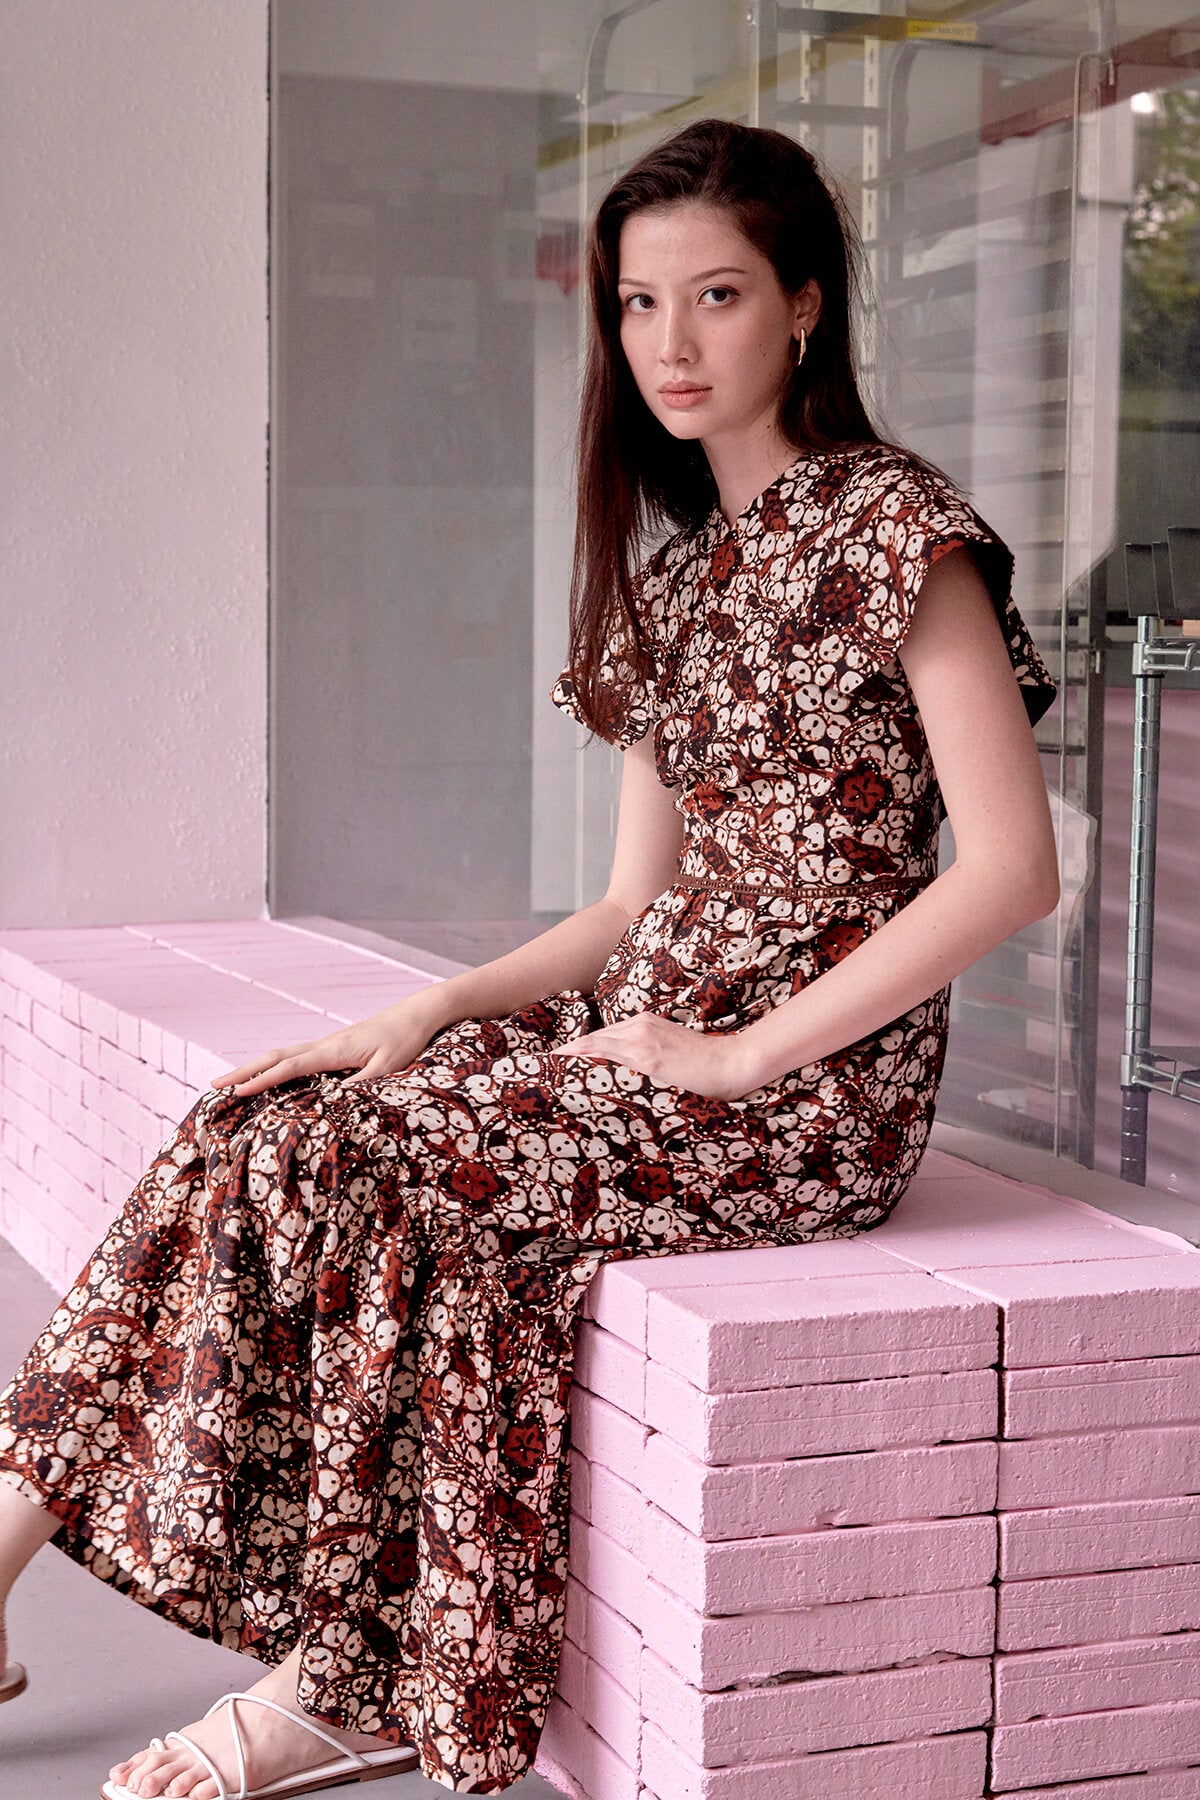 Young eurasian female lady, seated on pink ledge, modelling a long batik dress with brown and white batik prints.